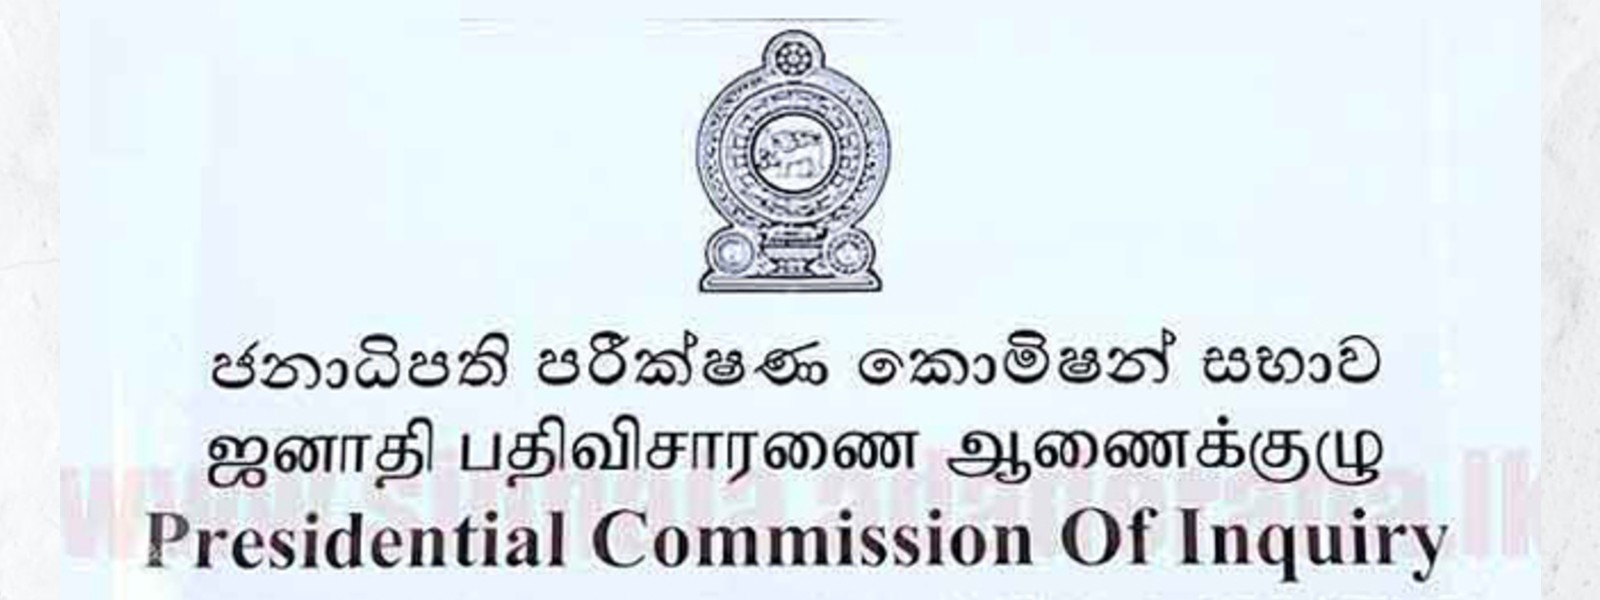 Notice issued on Ex-Ministers, Ex-CID Director and AGs Dept Counsel by PCoI